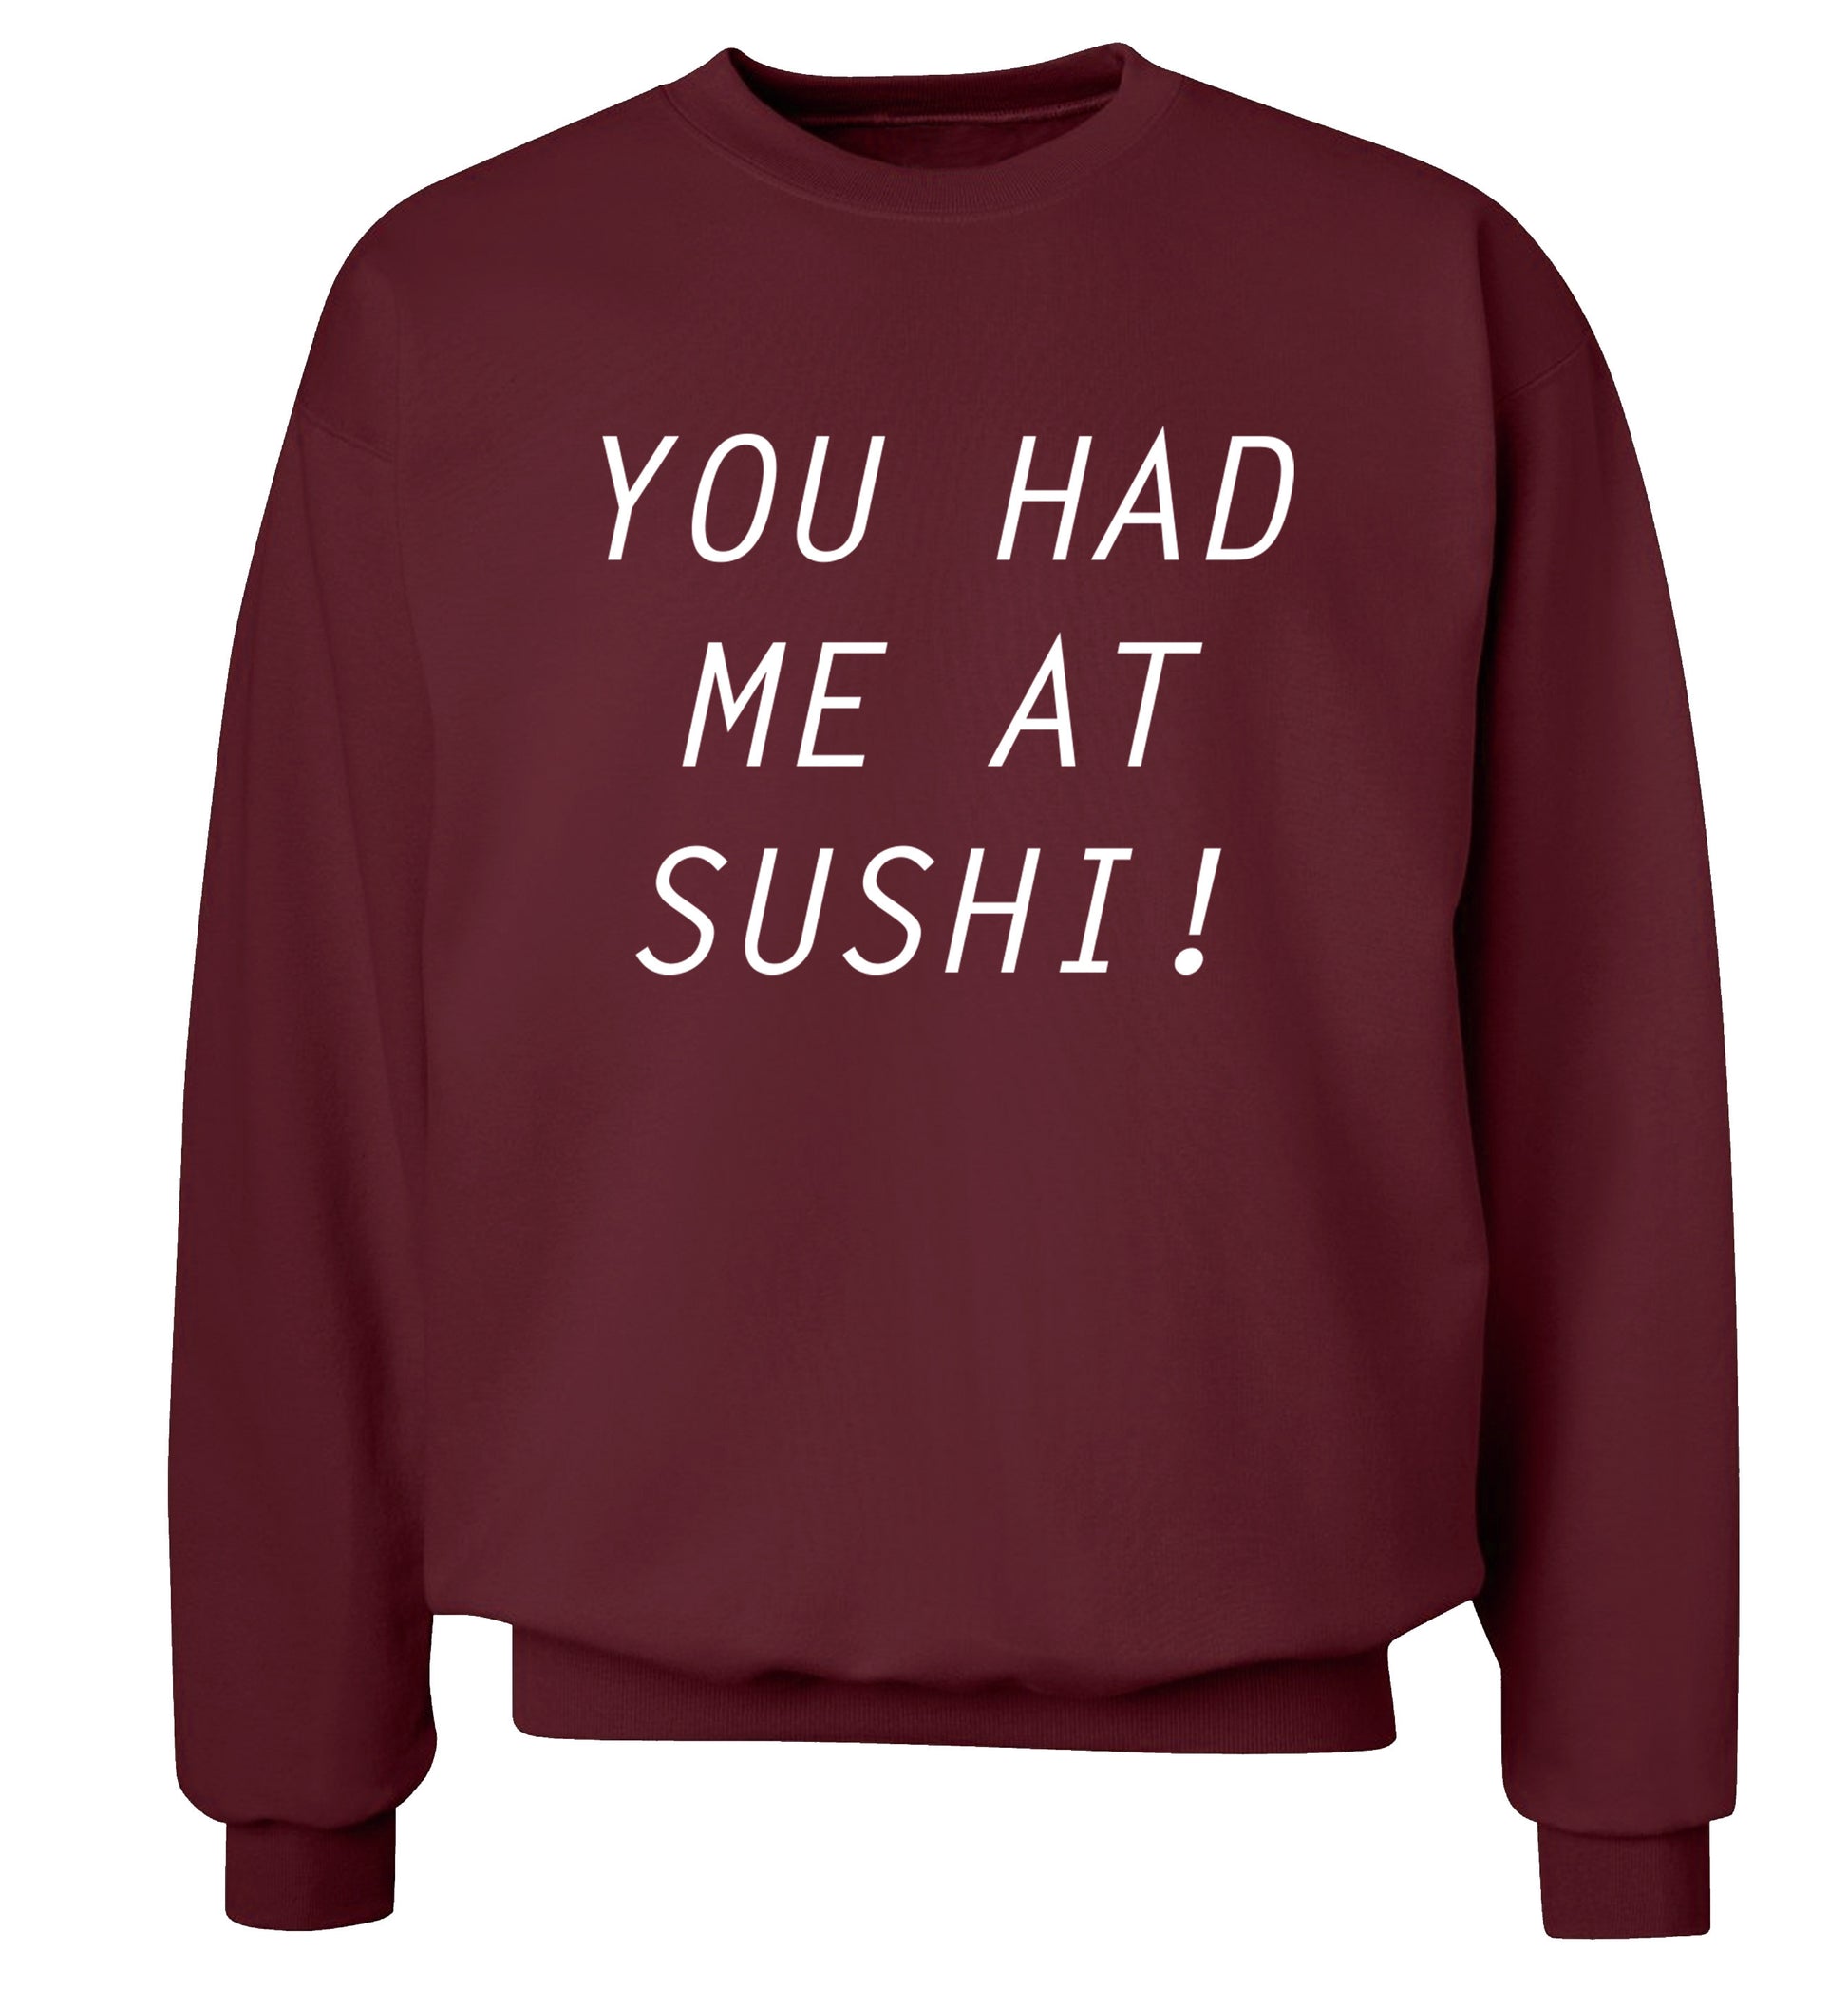 You had me at sushi Adult's unisex maroon Sweater 2XL